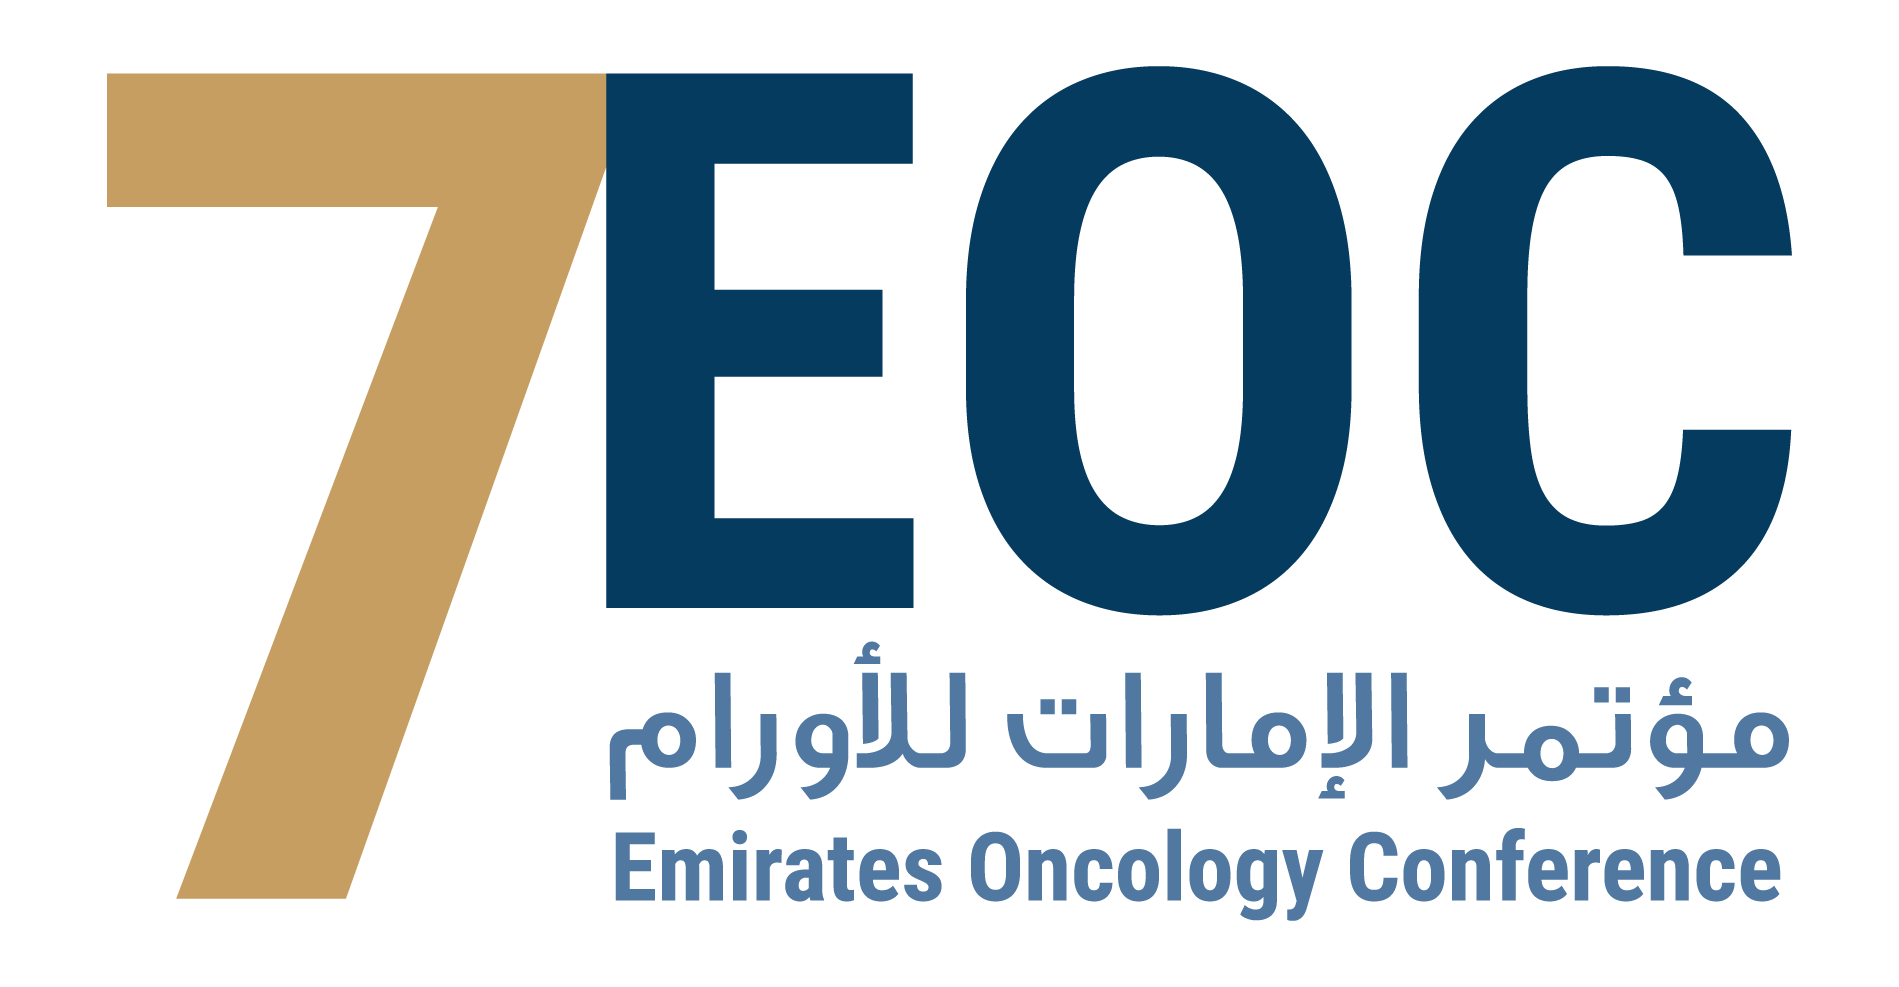 7th annual Emirates Oncology Conference